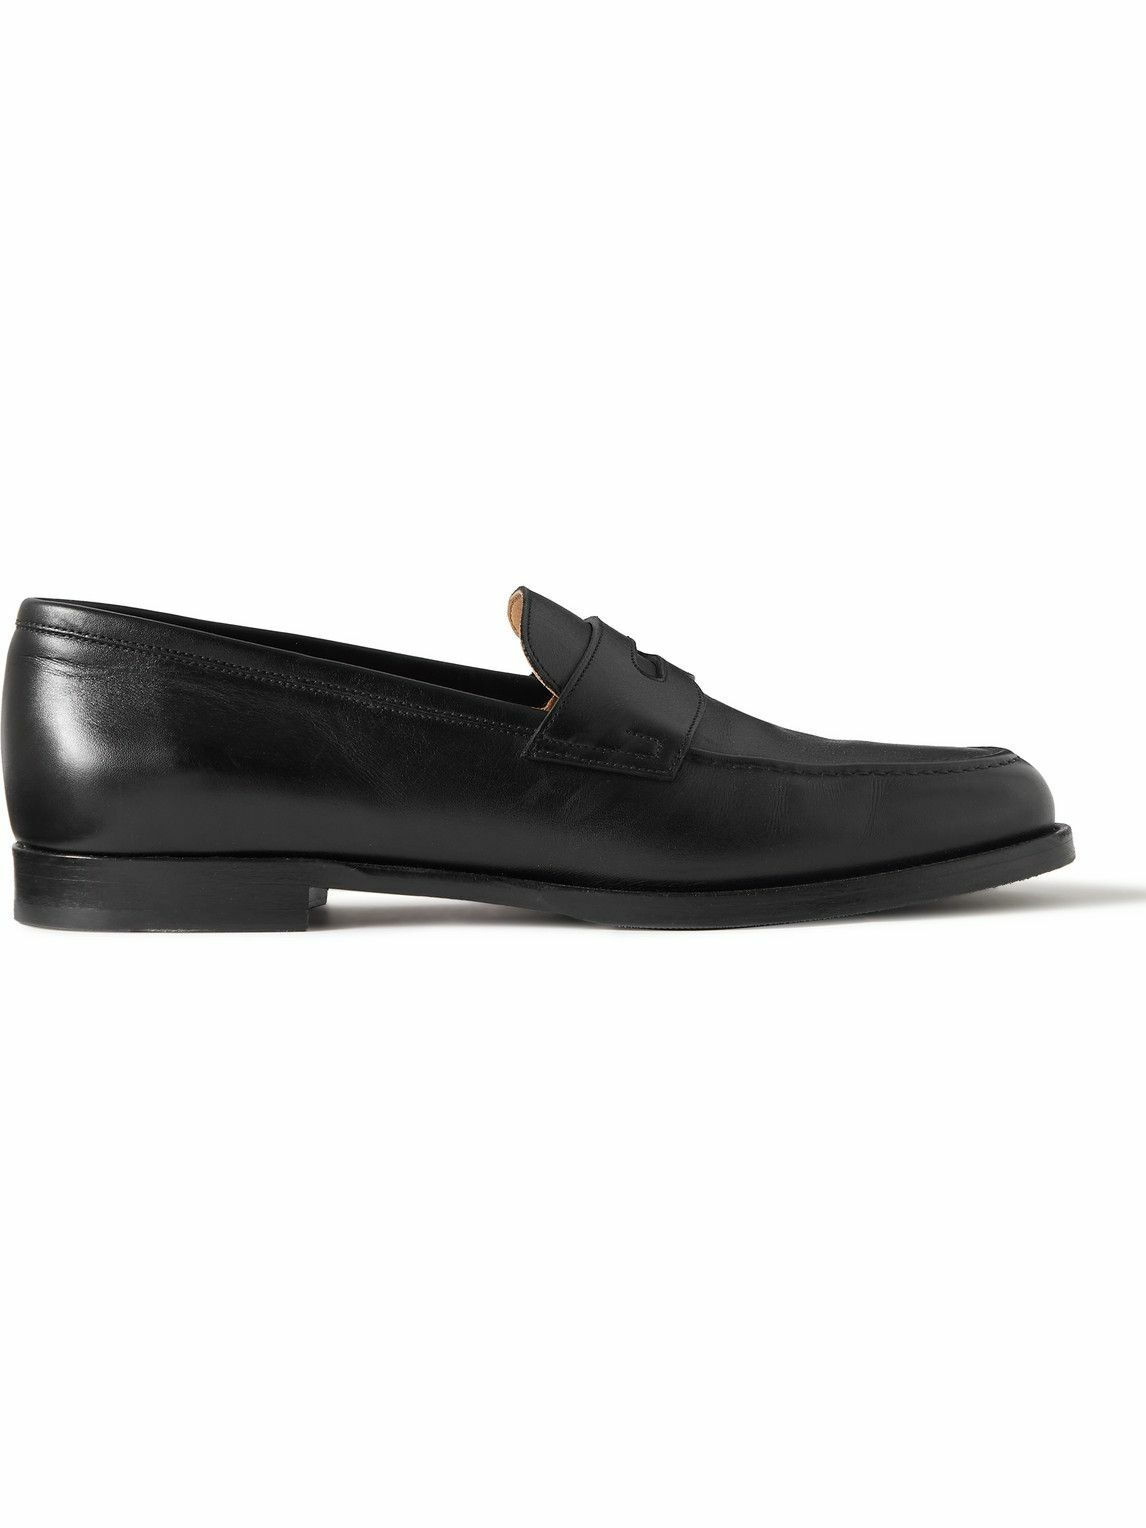 Photo: Dunhill - Audley Leather Penny Loafers - Black